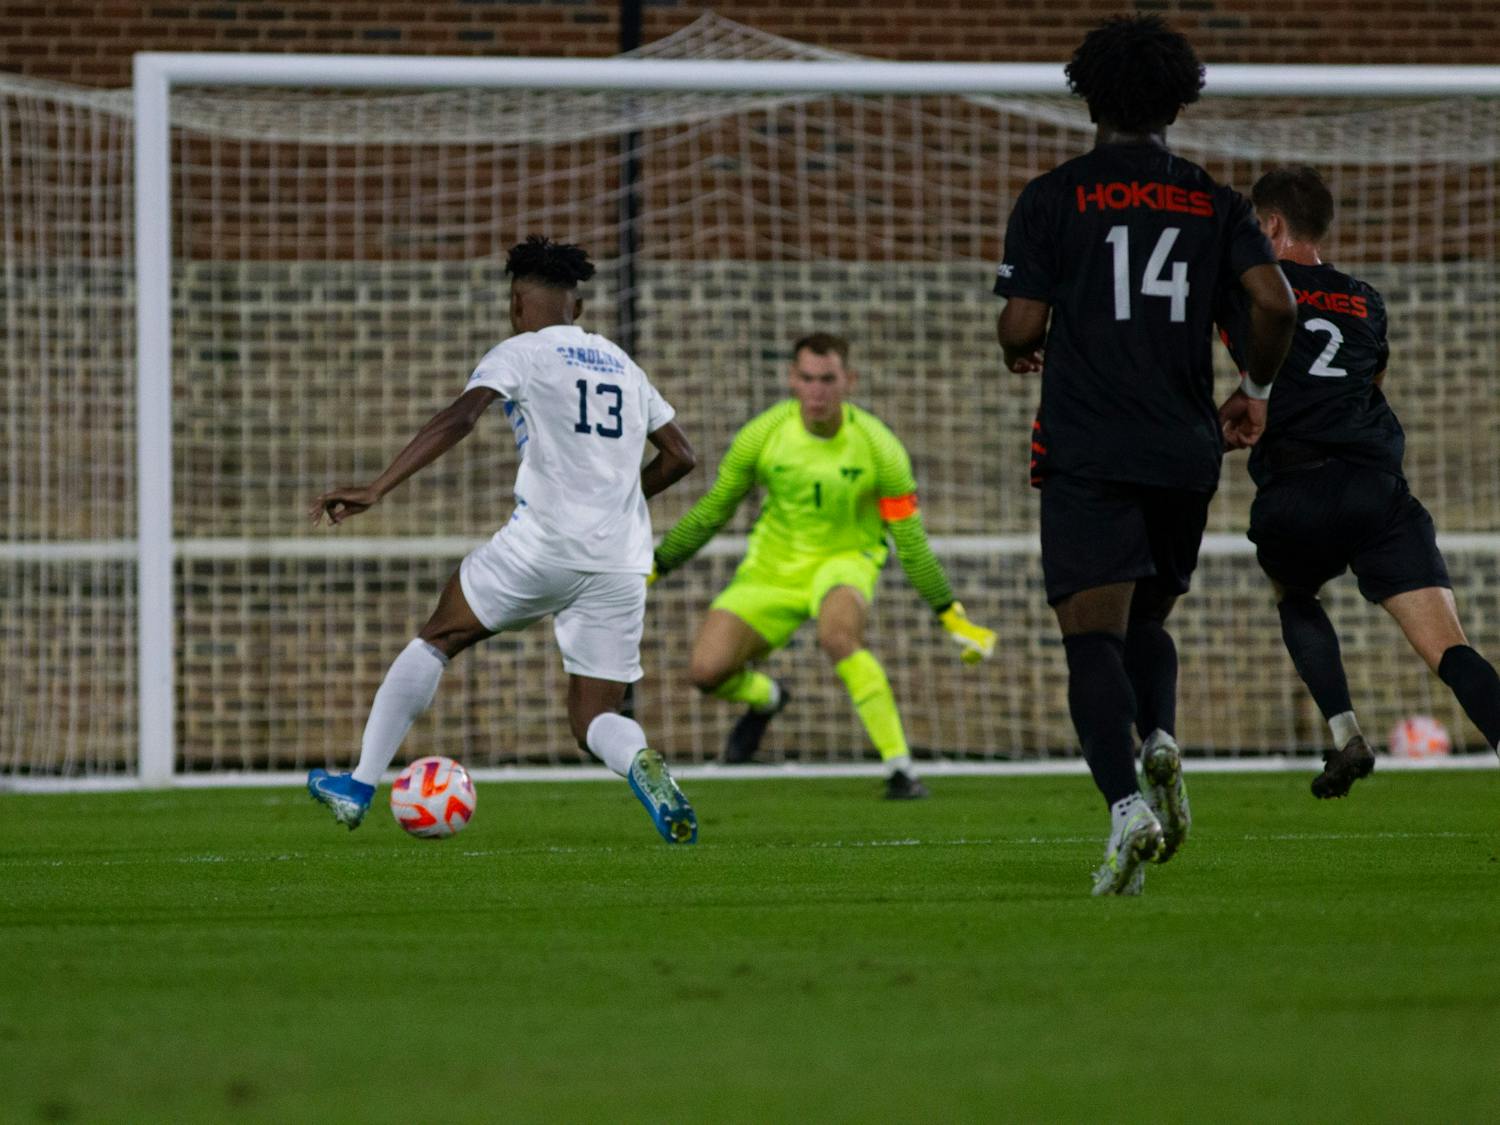 UNC redshirt Junior Key White (13) moments before his goal against VT in Chapel Hill on Fri. Oct. 7, 2022